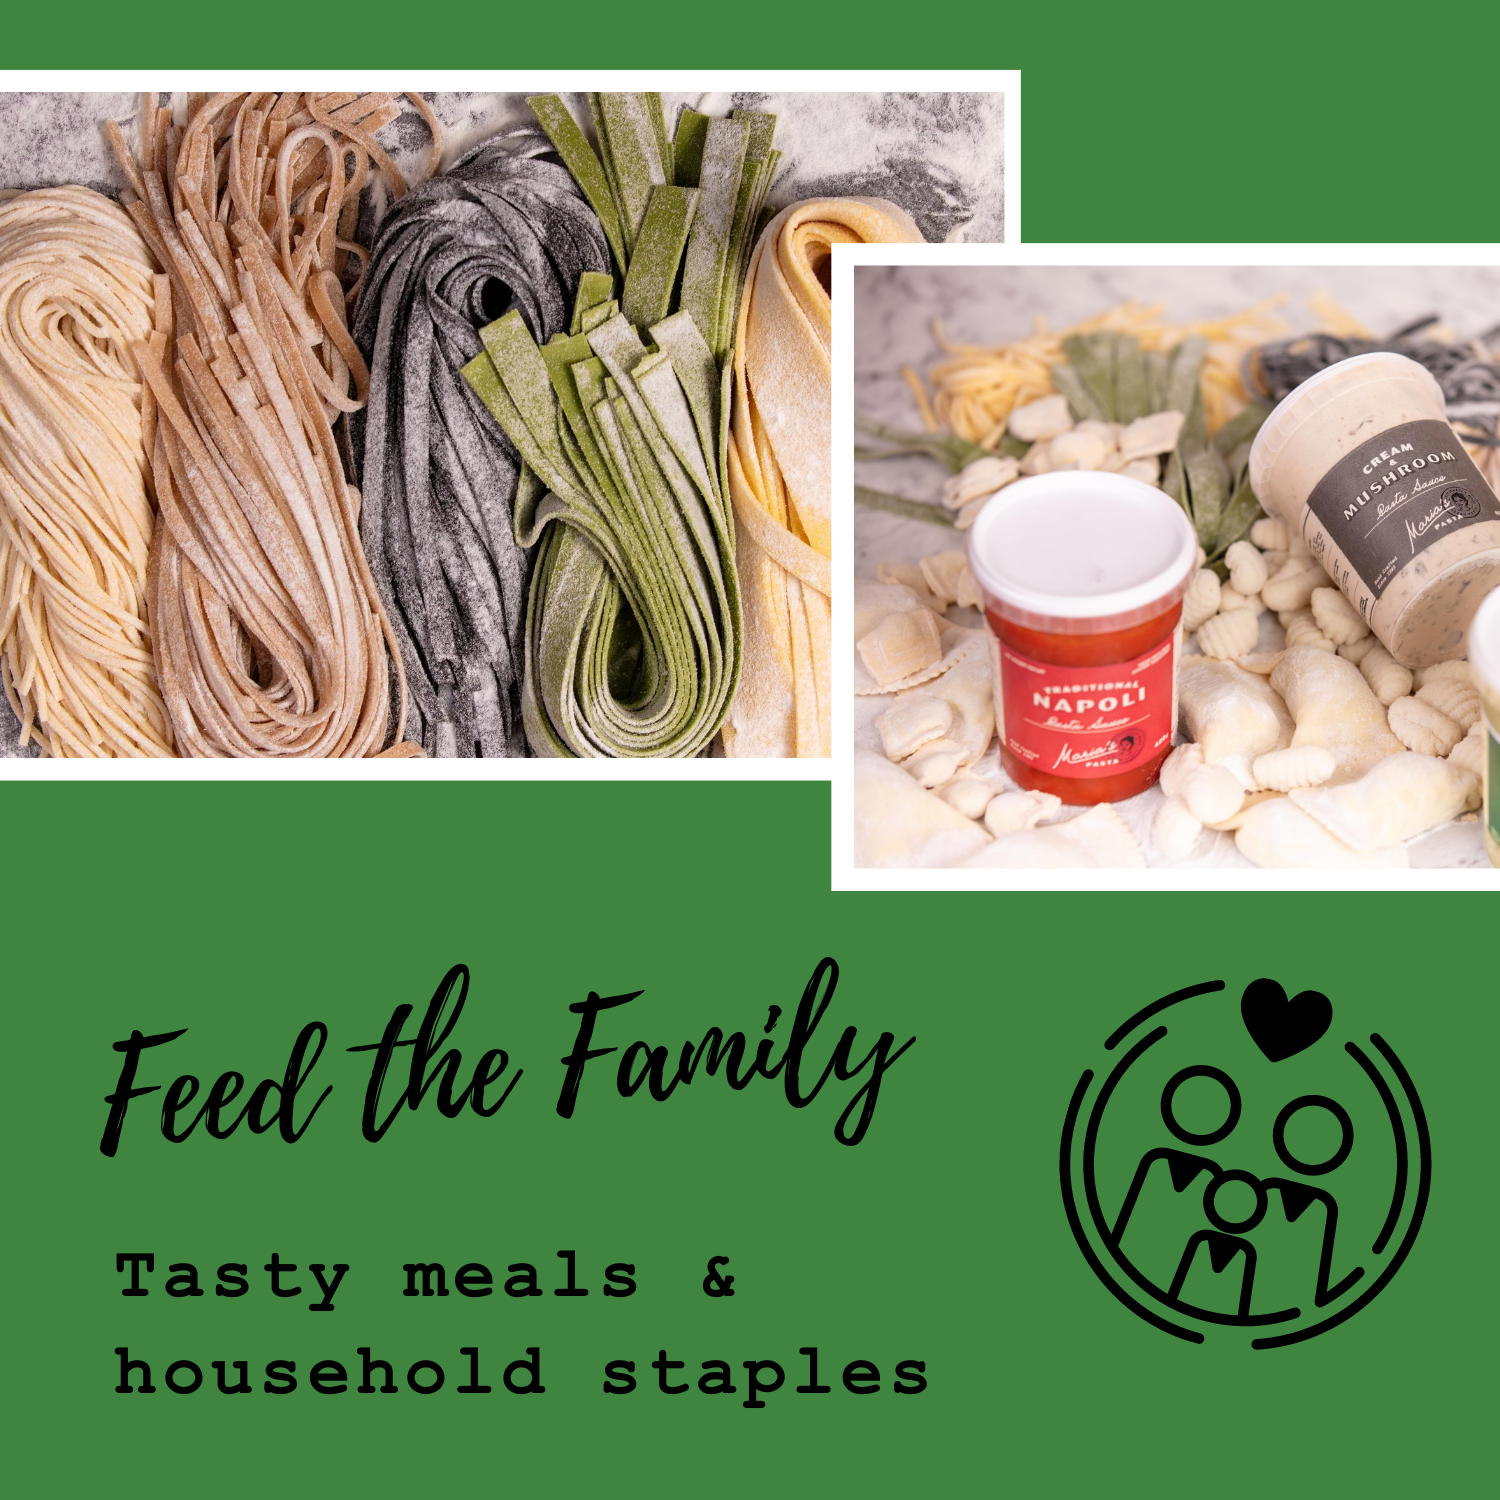 Feed the family collection box